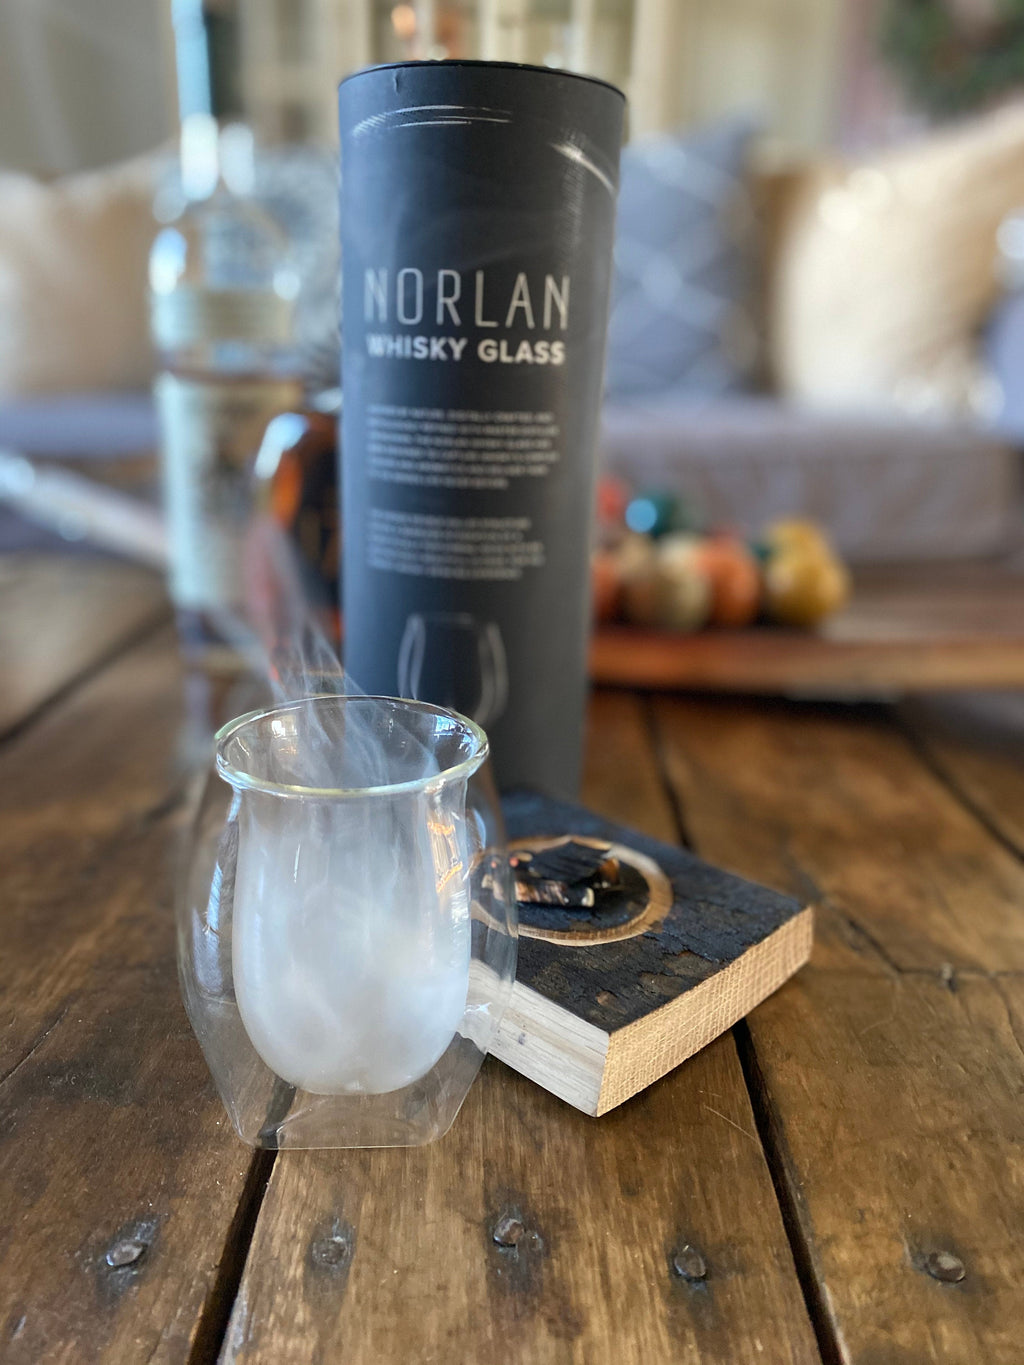 The Norlan Whisky Glass 